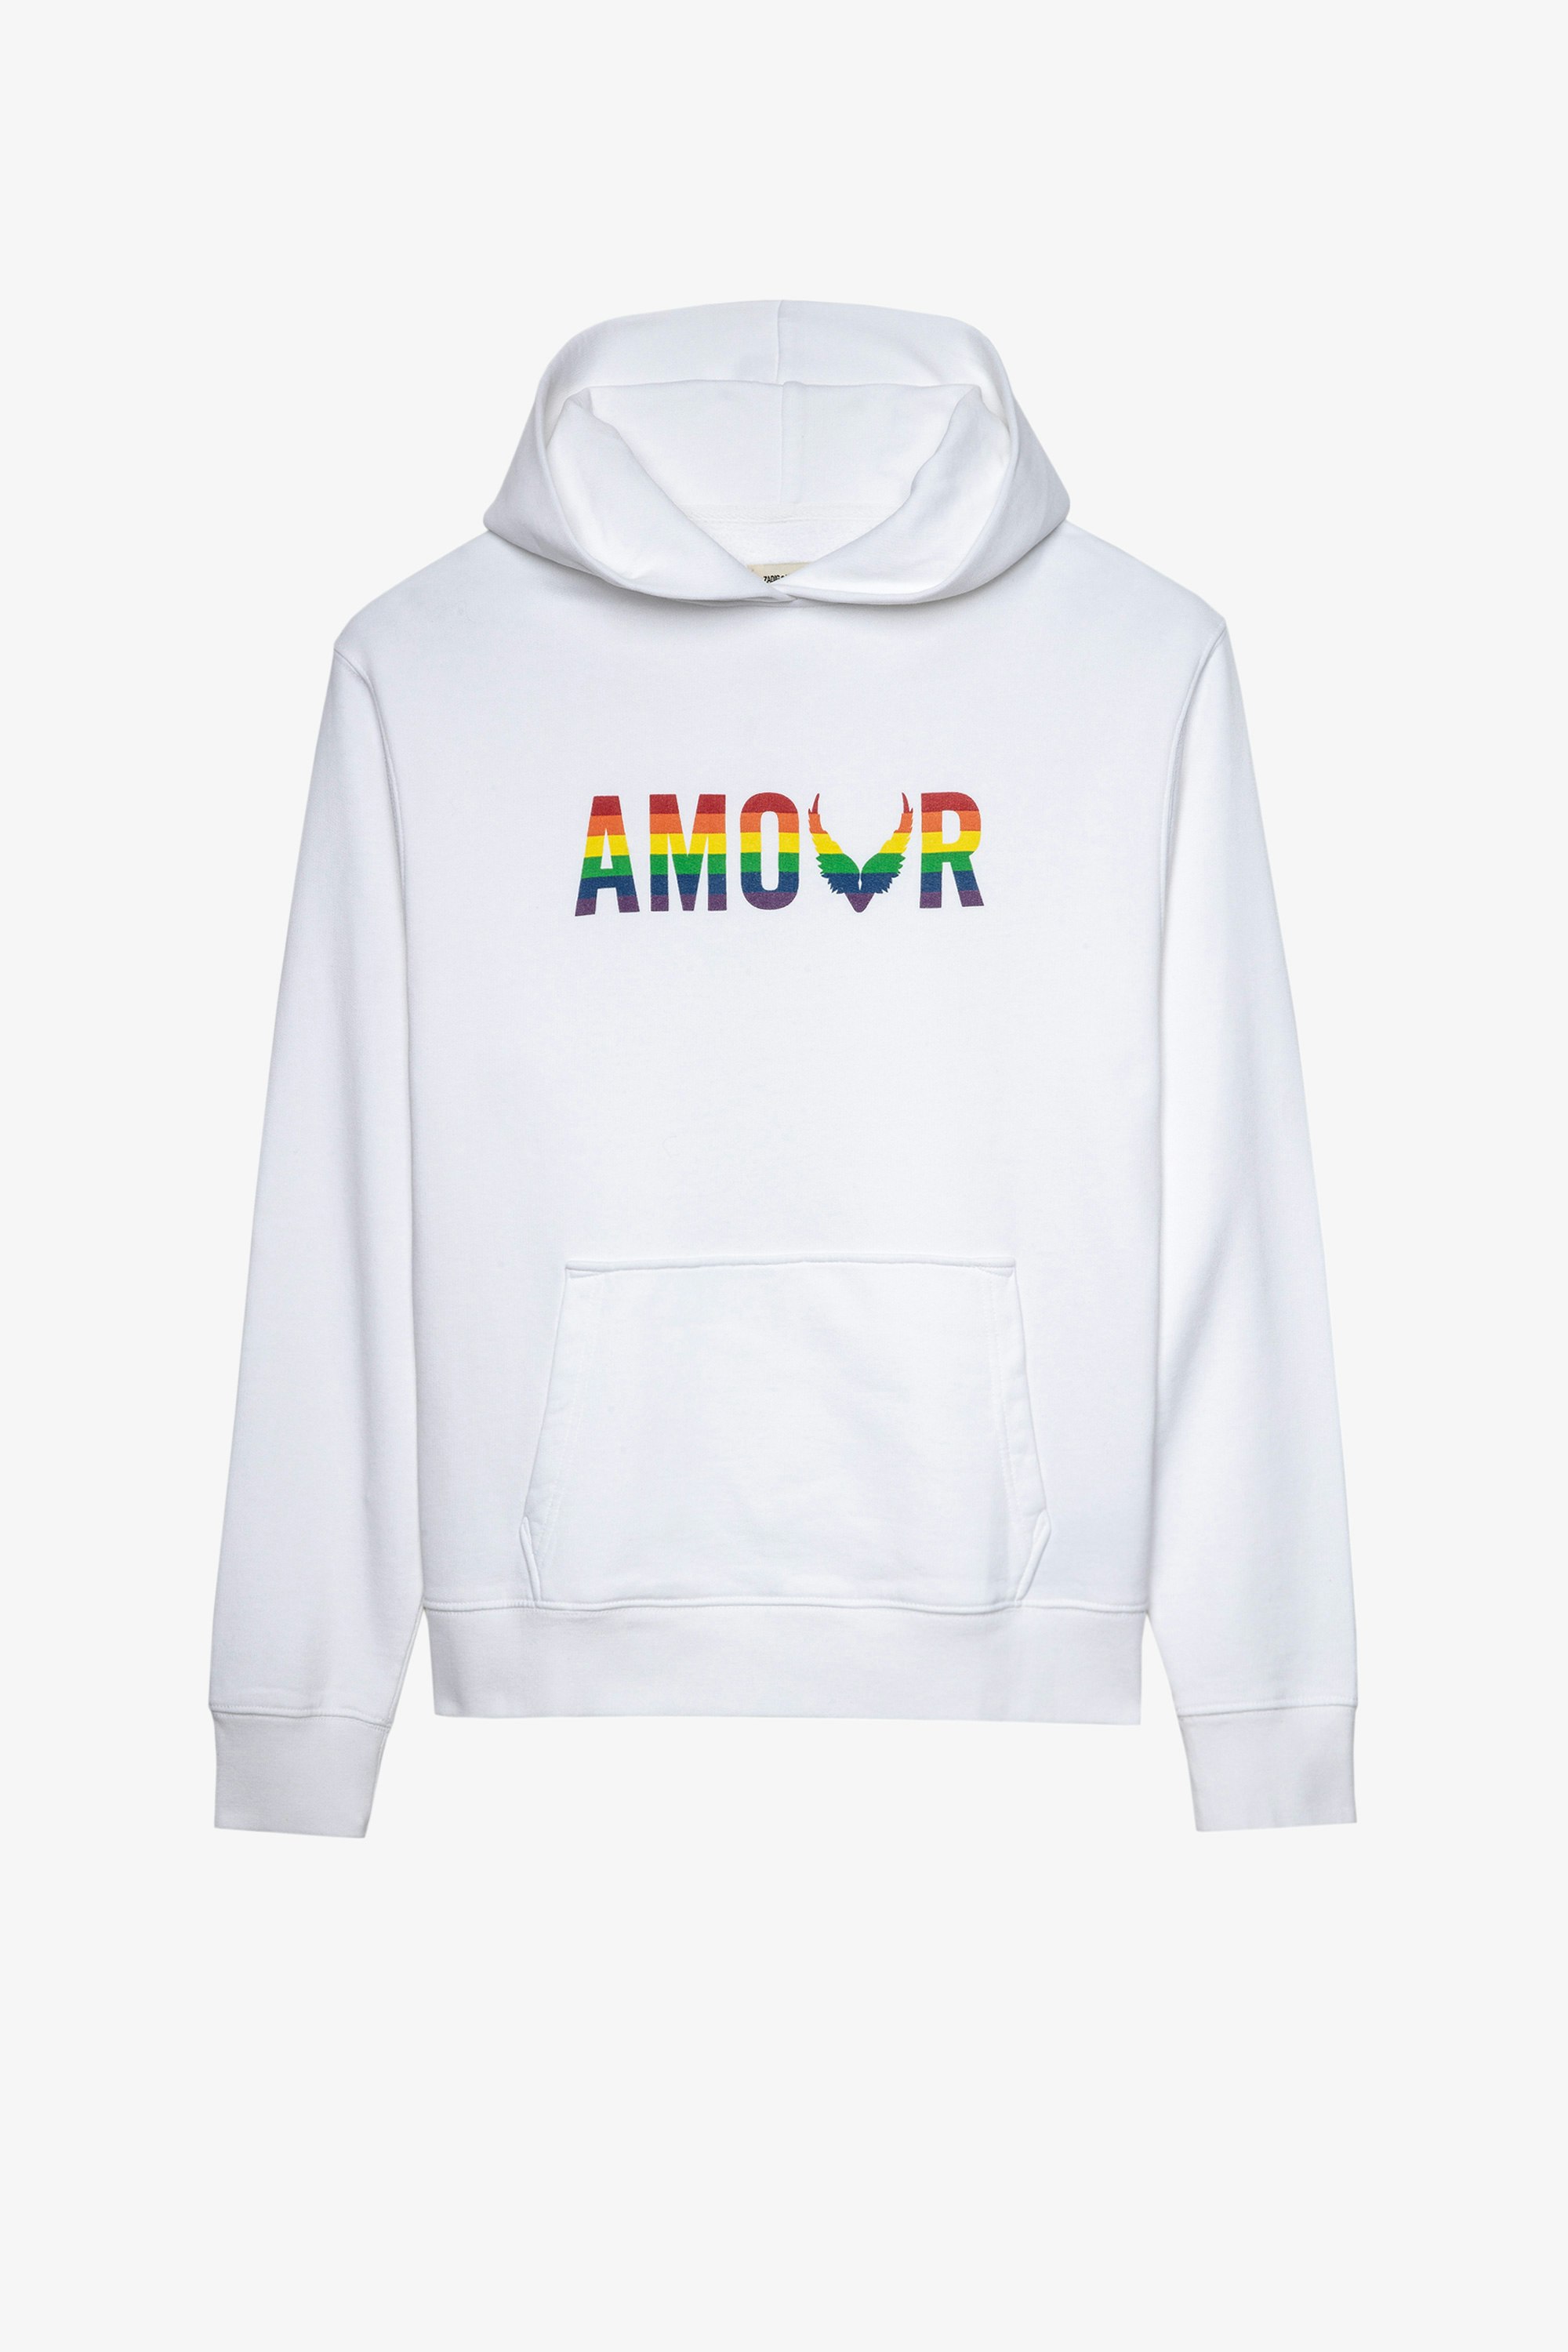 Sanchi Amour Wings スウェット Women’s white cotton hooded sweatshirt with multicoloured Amour print